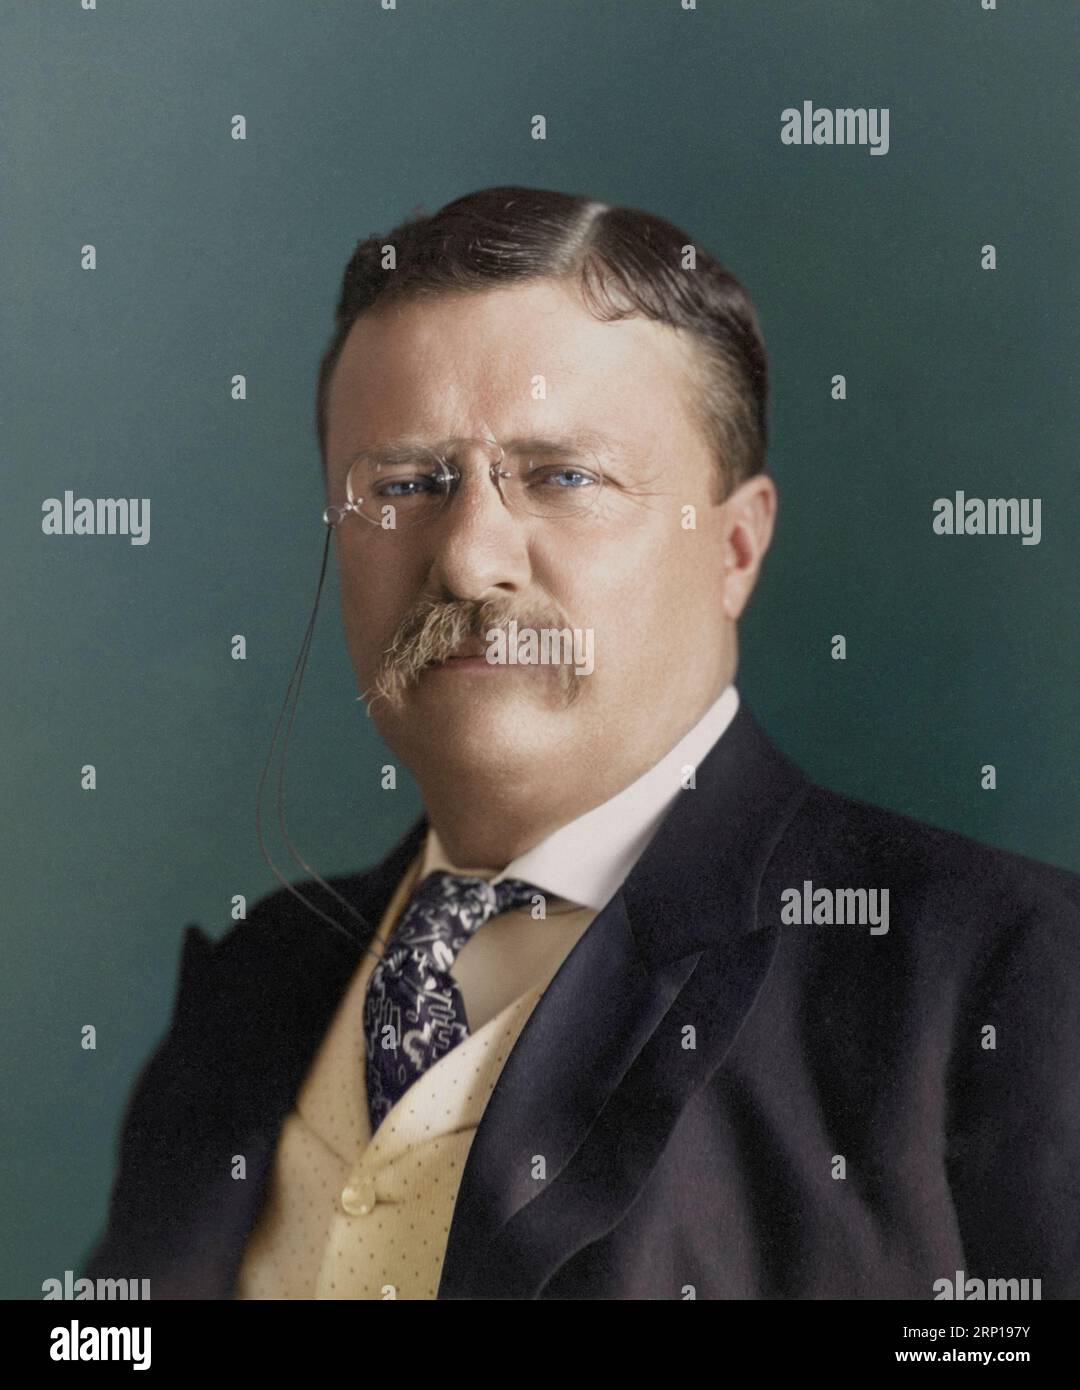 Theodore Roosevelt By Pach Brothers c 1904. Stock Photo